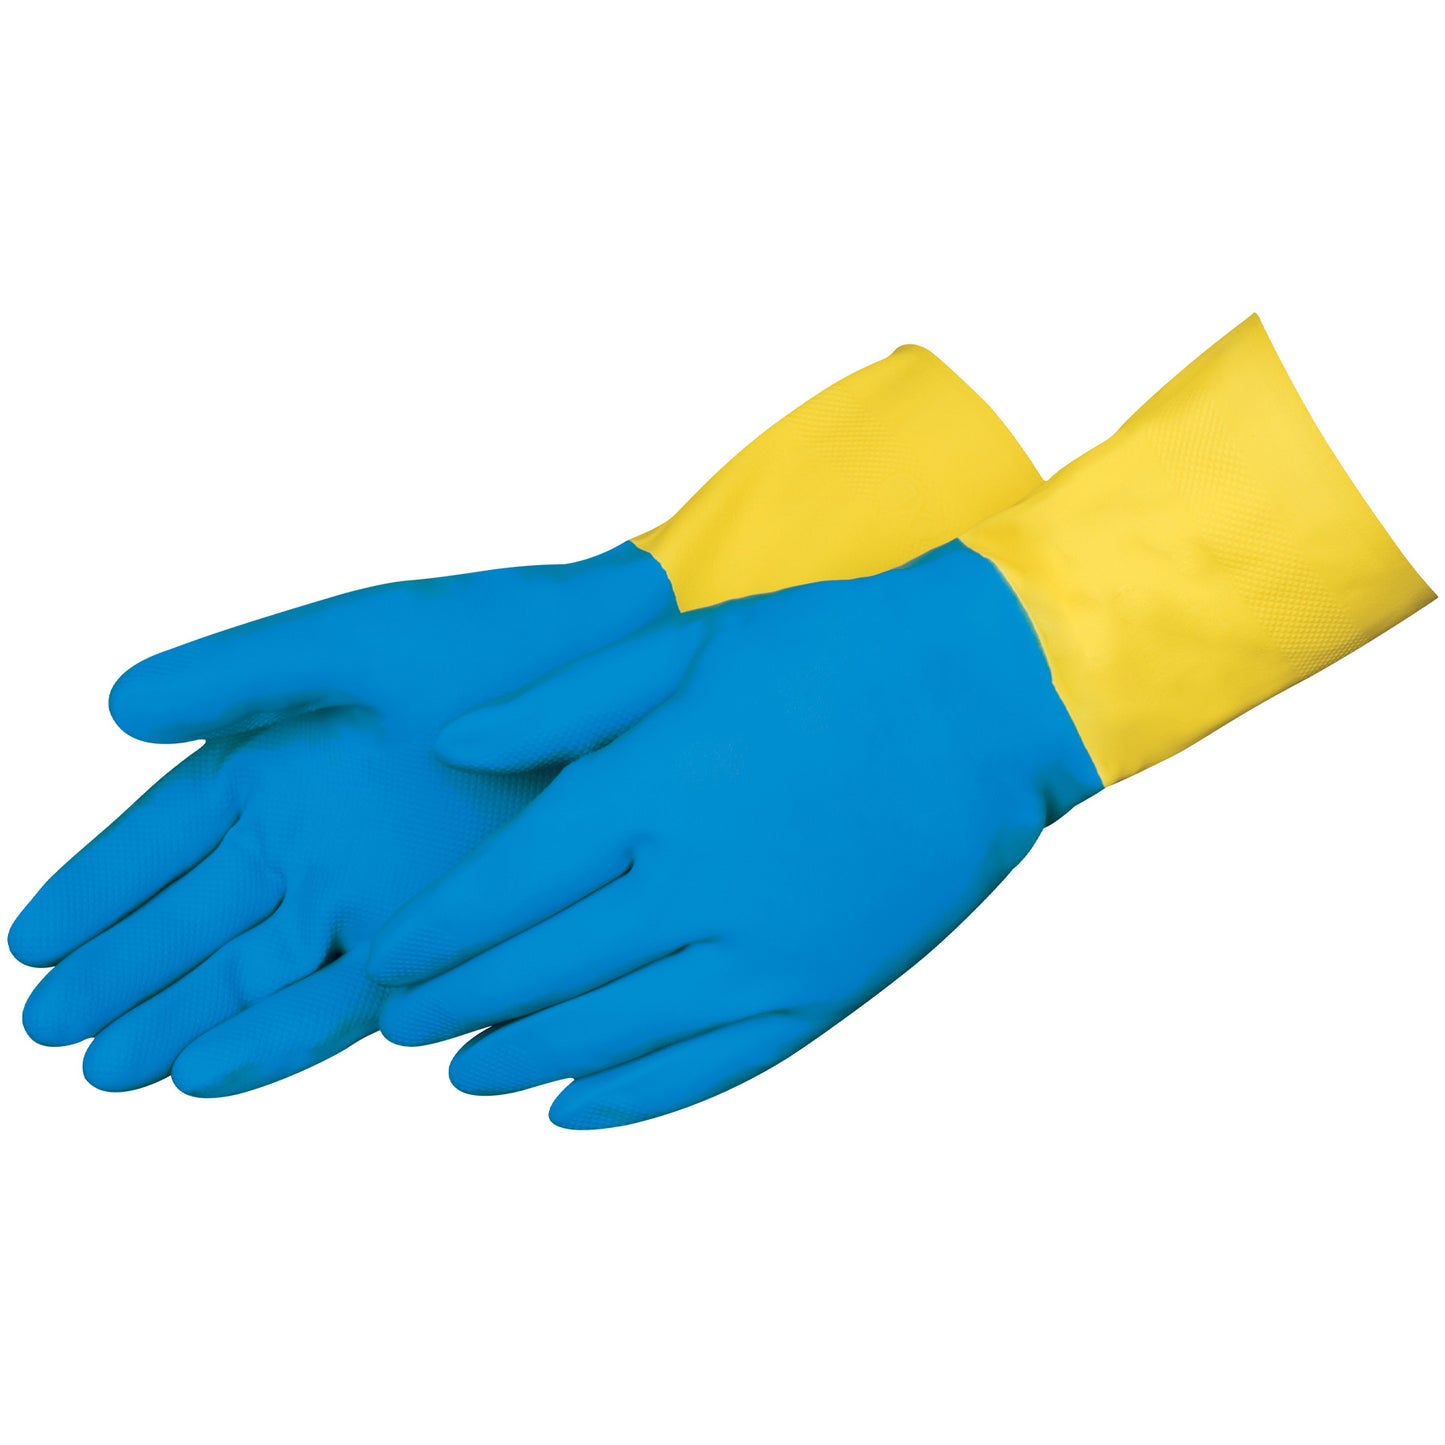 T124-  BLUE/YELLOW -  FLOCK LINED NEOPRENE/RUBBER 30 MIL - 13IN. - PAIR